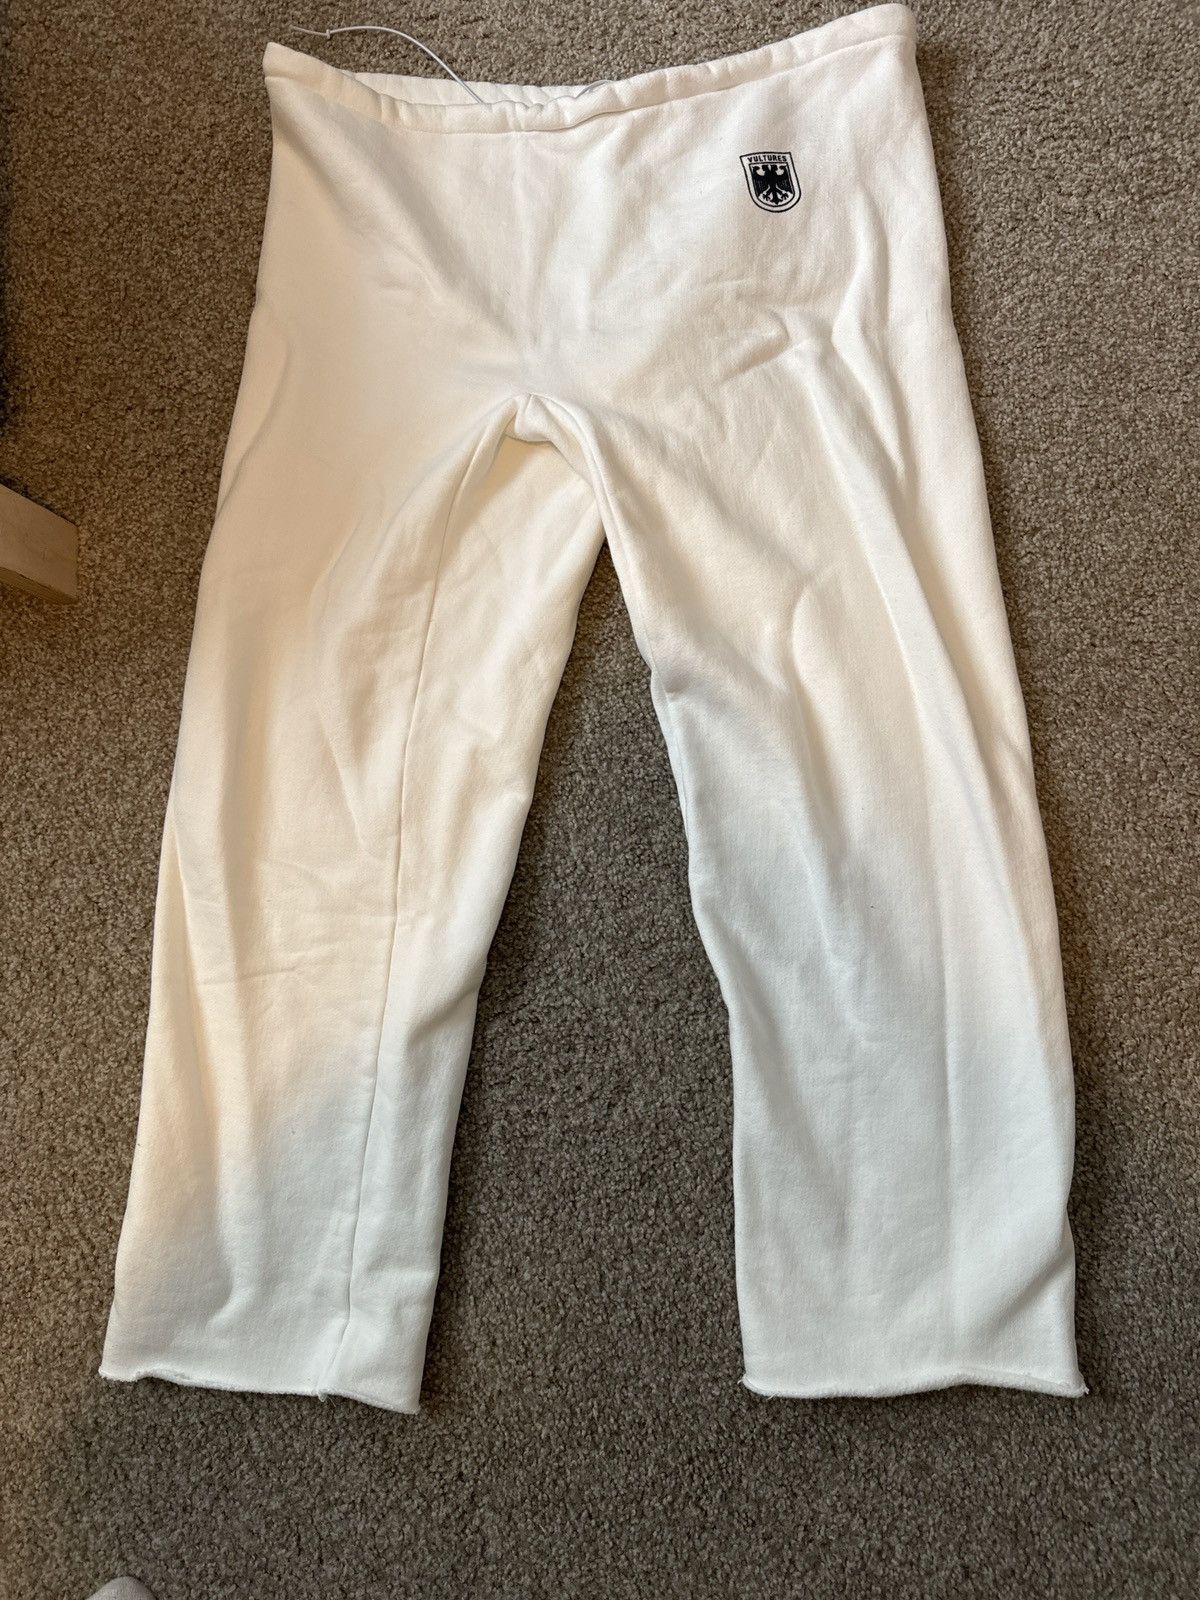 Kanye West VULTURES PANTS - WHITE SIZE 3 | Grailed